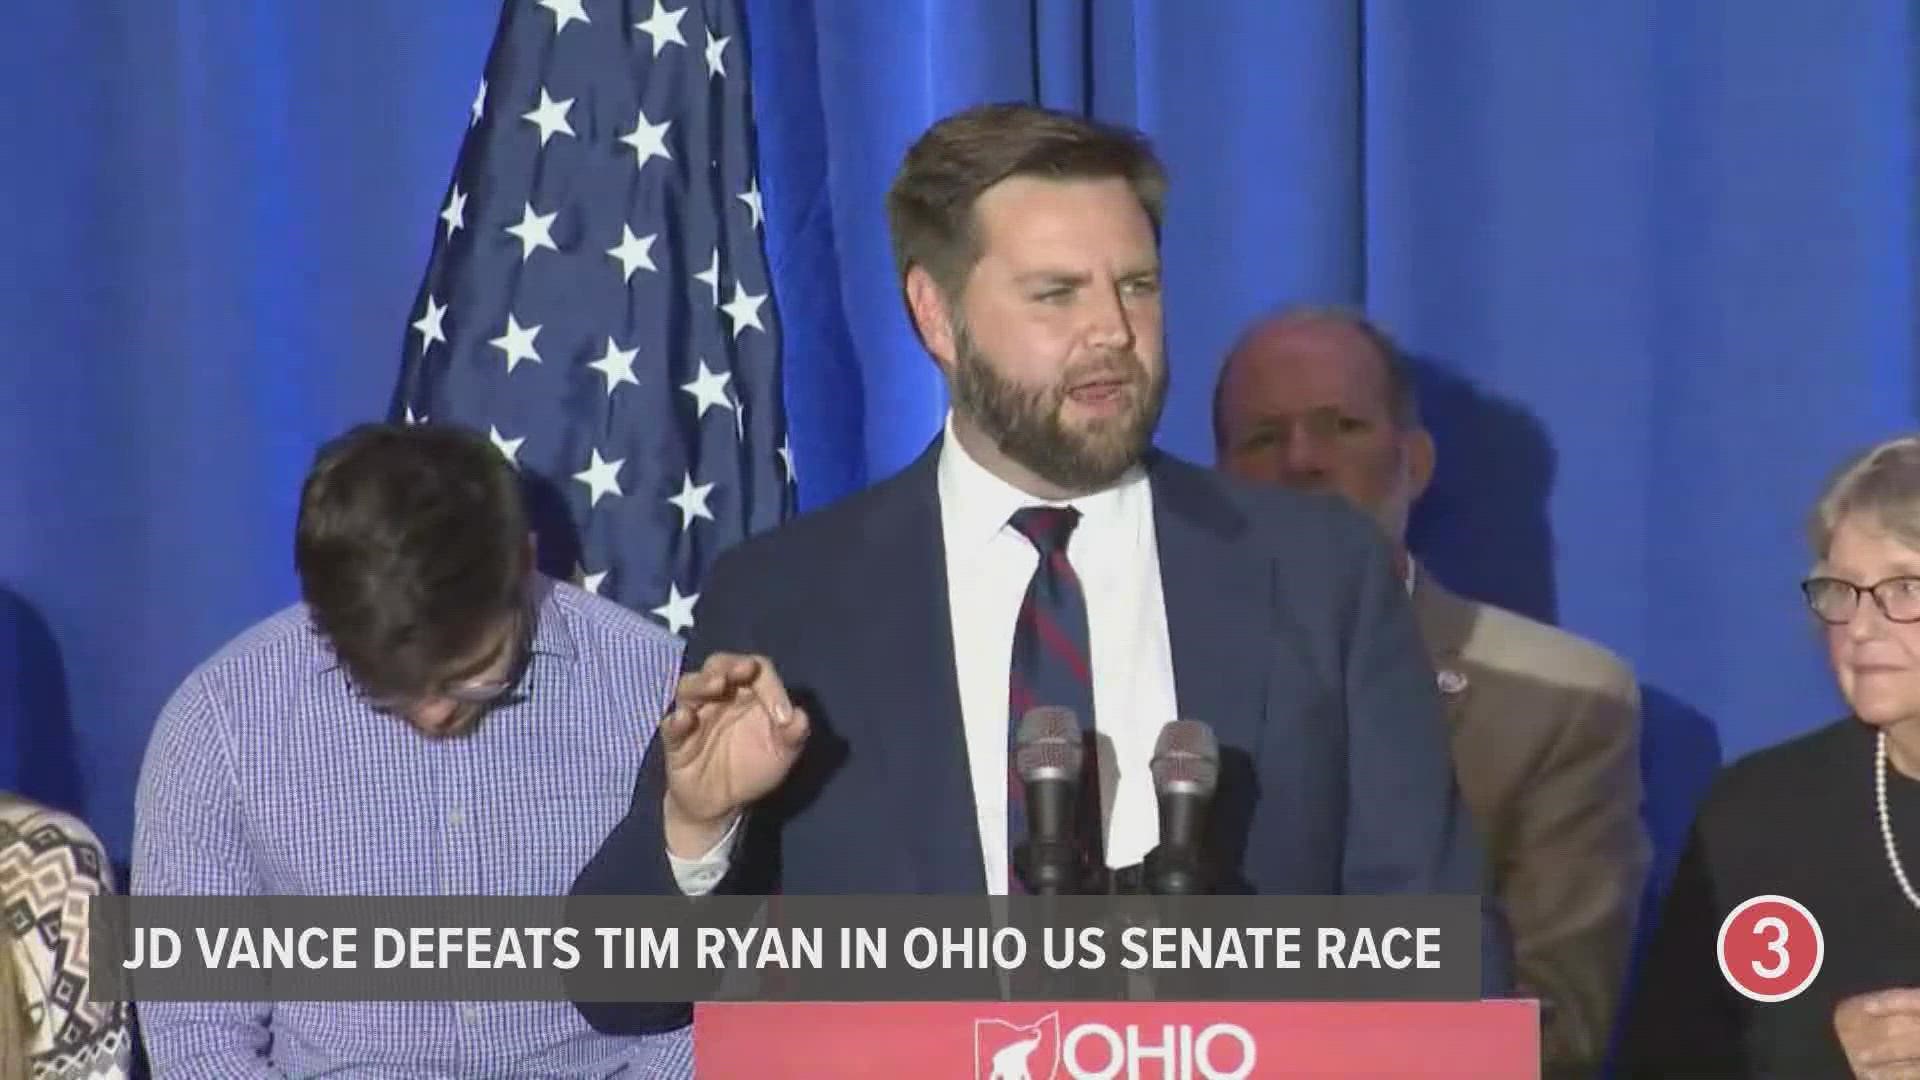 JD Vance, a venture capitalist and best-selling "Hillbilly Elegy" author, has defeated longtime Democratic U.S. Rep. Tim Ryan.